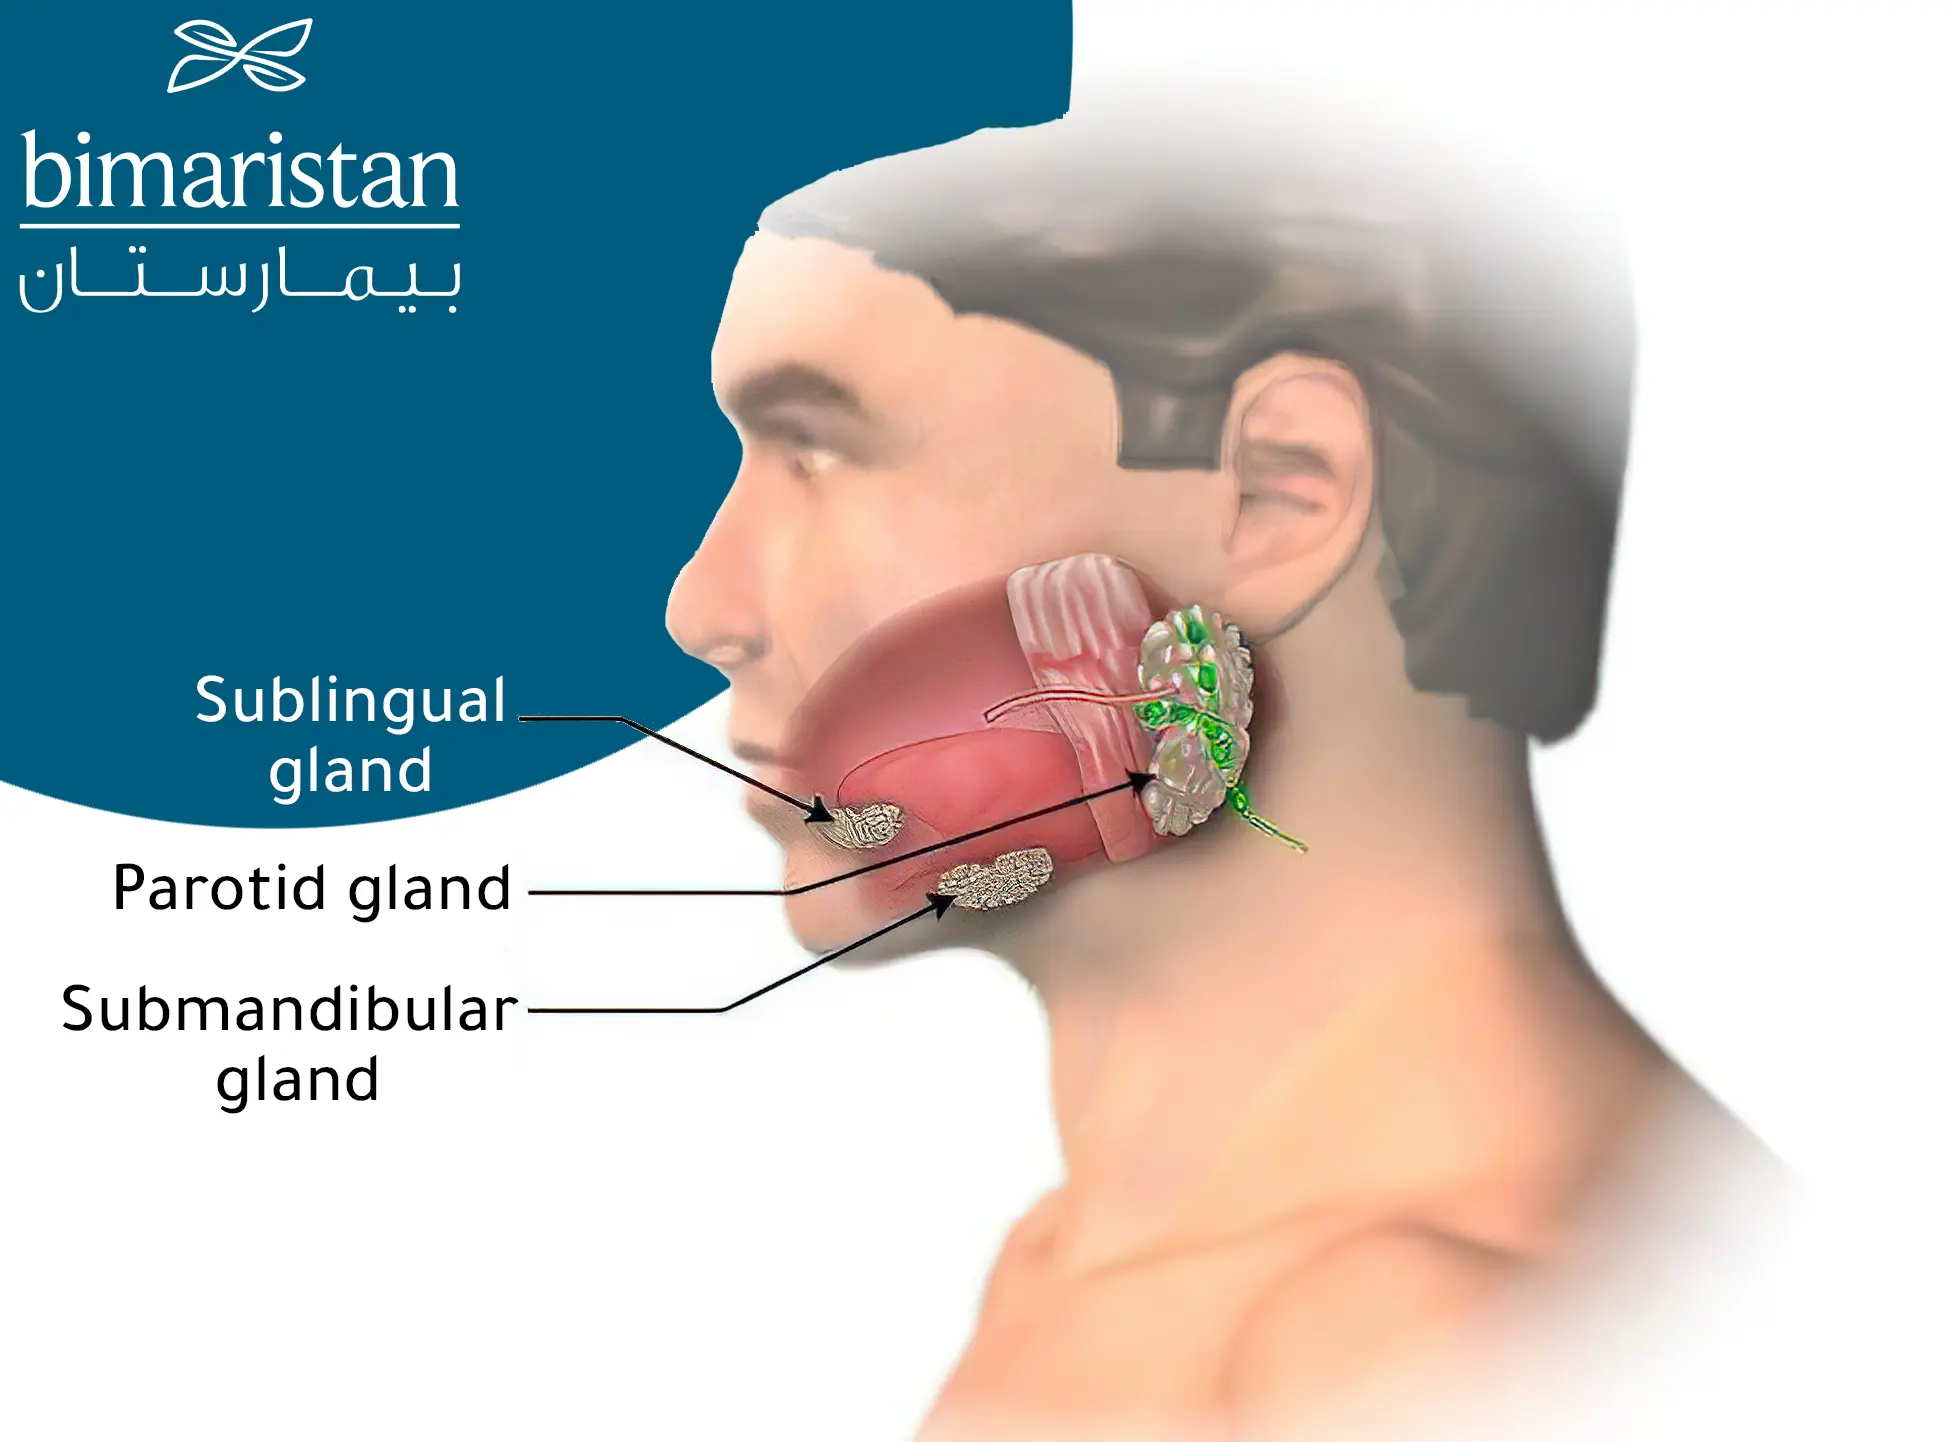 The location of the major salivary glands